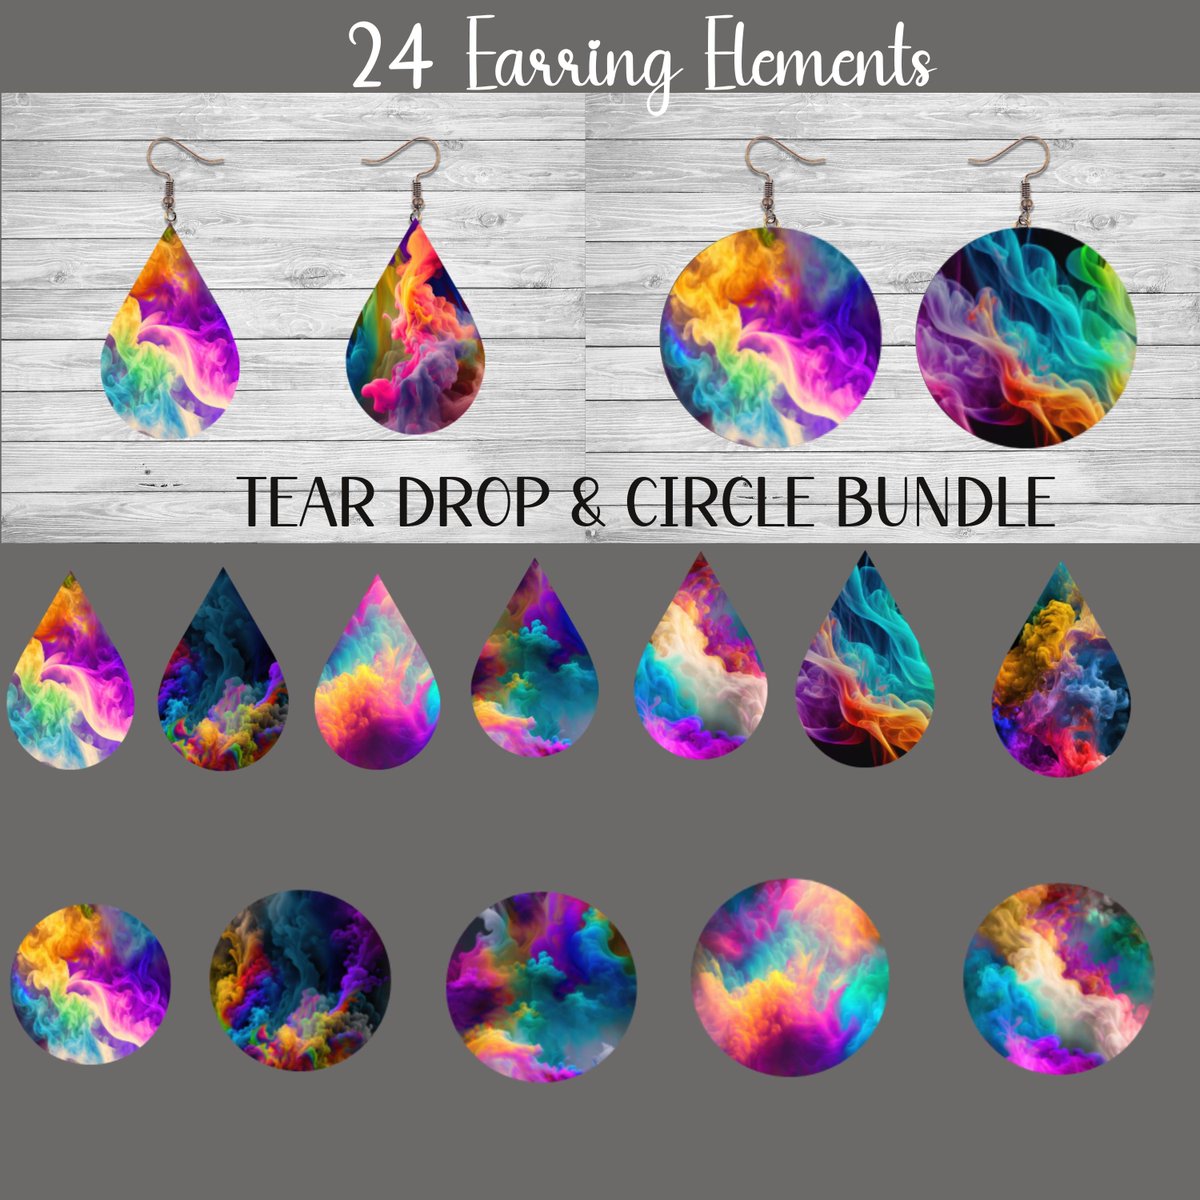 Excited to share the latest addition to my #etsy shop: 24 Elements Fire in Wonderland Earrings Tear Drop & Circle Bundle etsy.me/3HSgDIU #earringwraps #earringtemplate #earringpng #teardropearrings #sublimationearring #circleearrings #blissfulloves